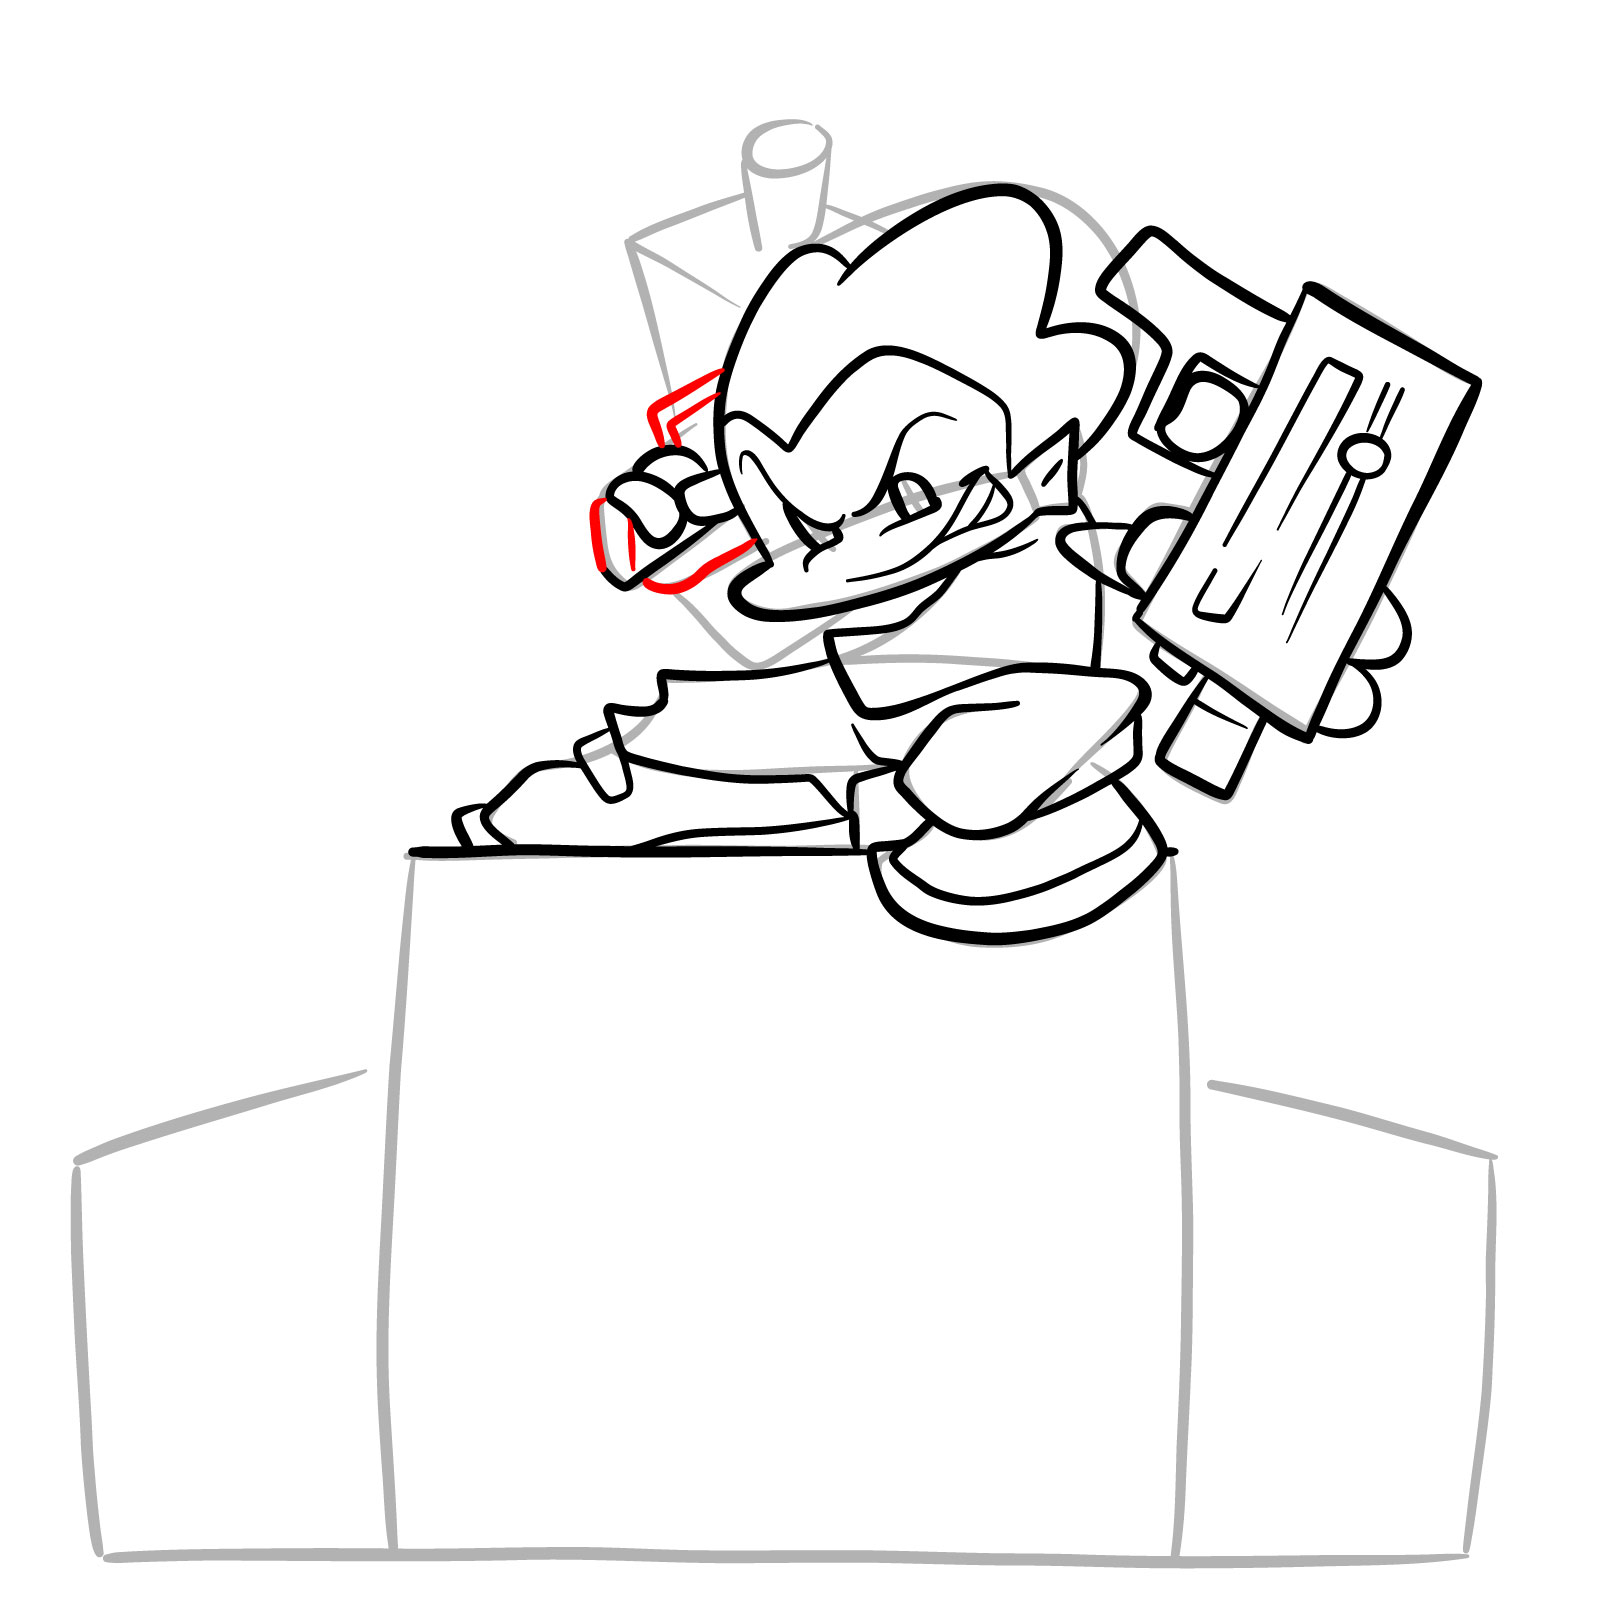 How to draw Pico on the speakers - step 21